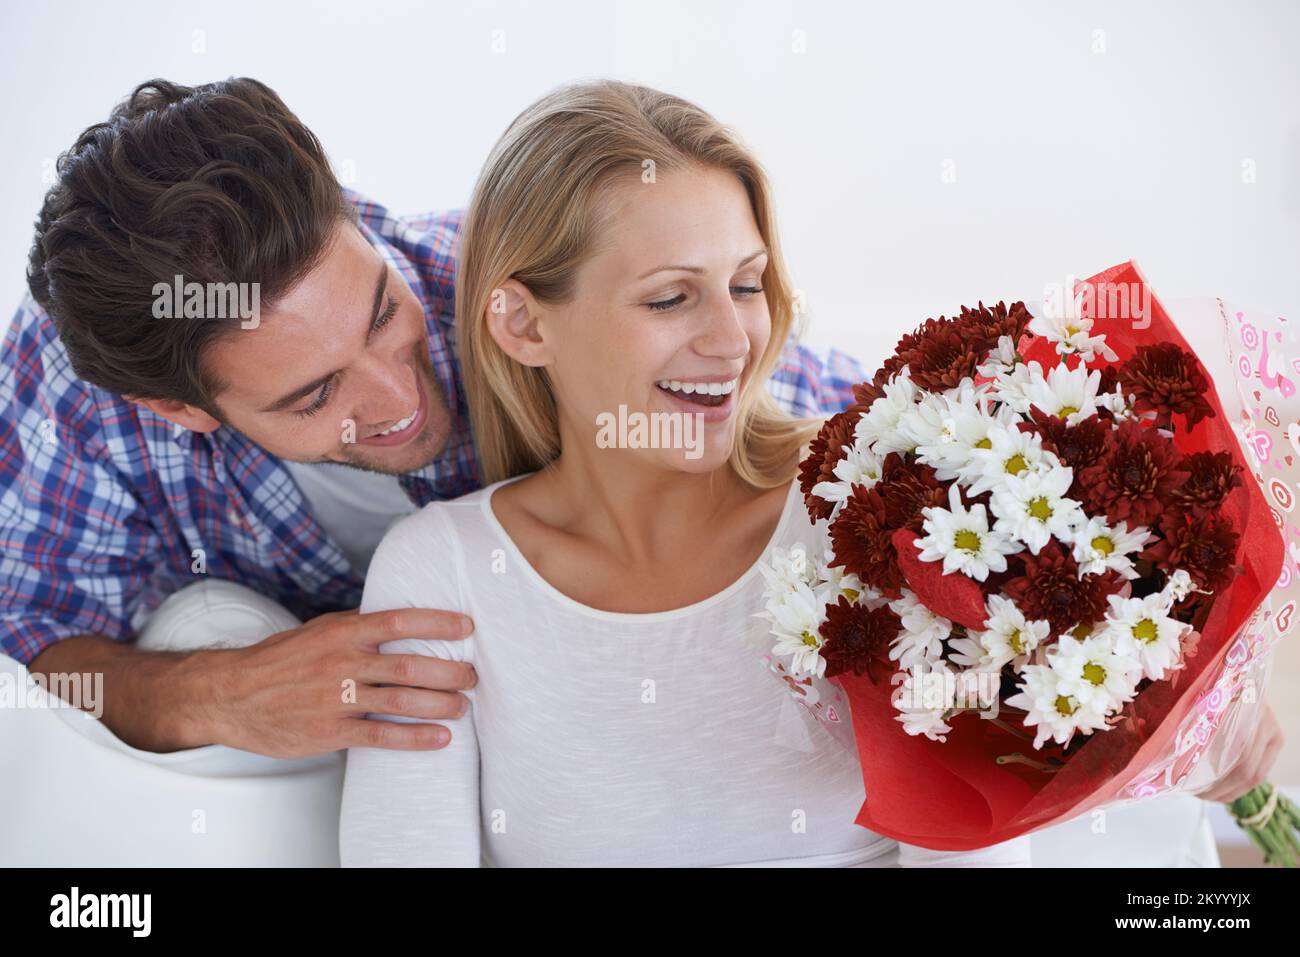 Its just you and me. a man suprsing his partner with flowers at home. Stock Photo